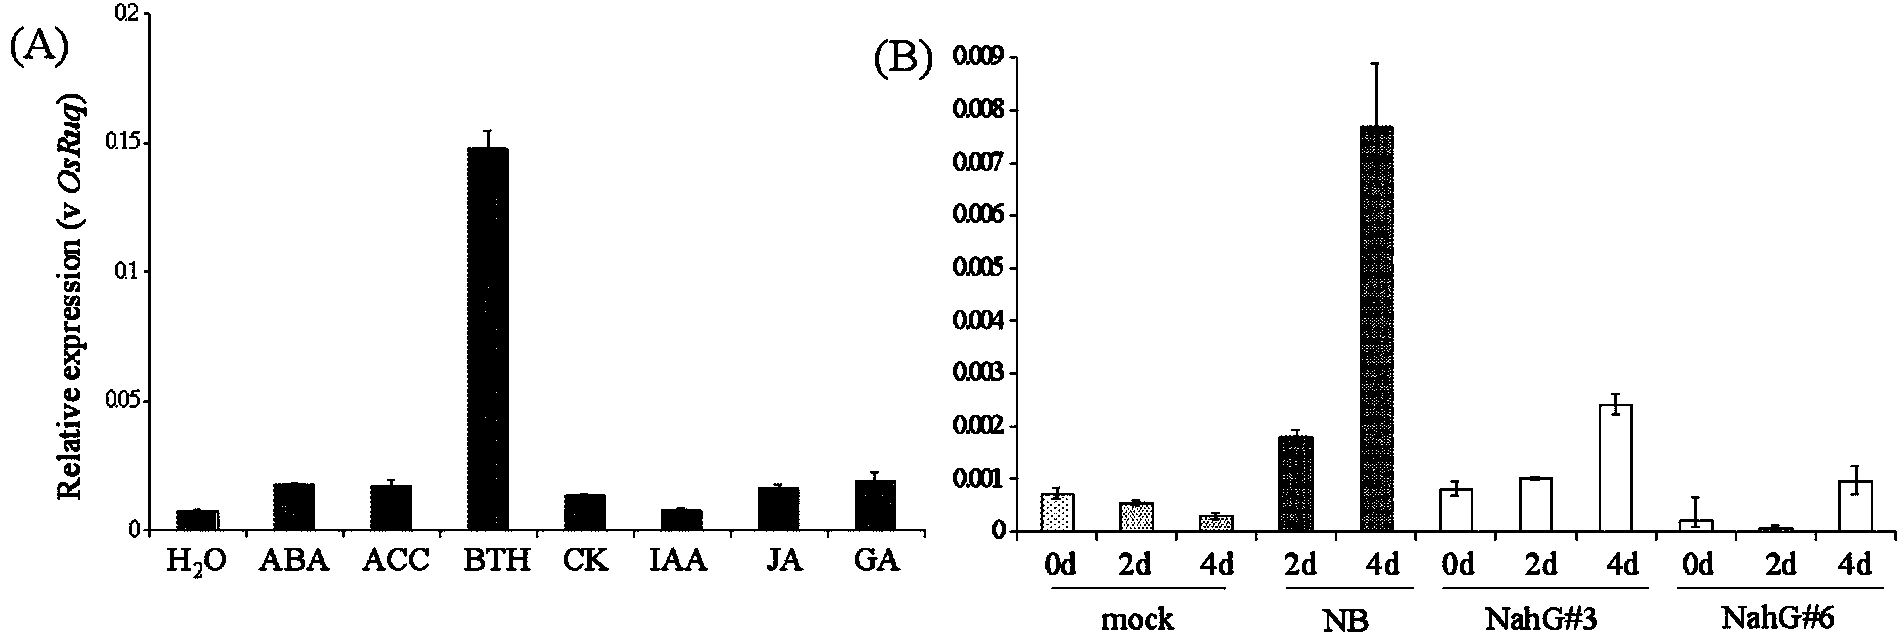 Rice induced disease-resistant gene OsAAA1 and application thereof